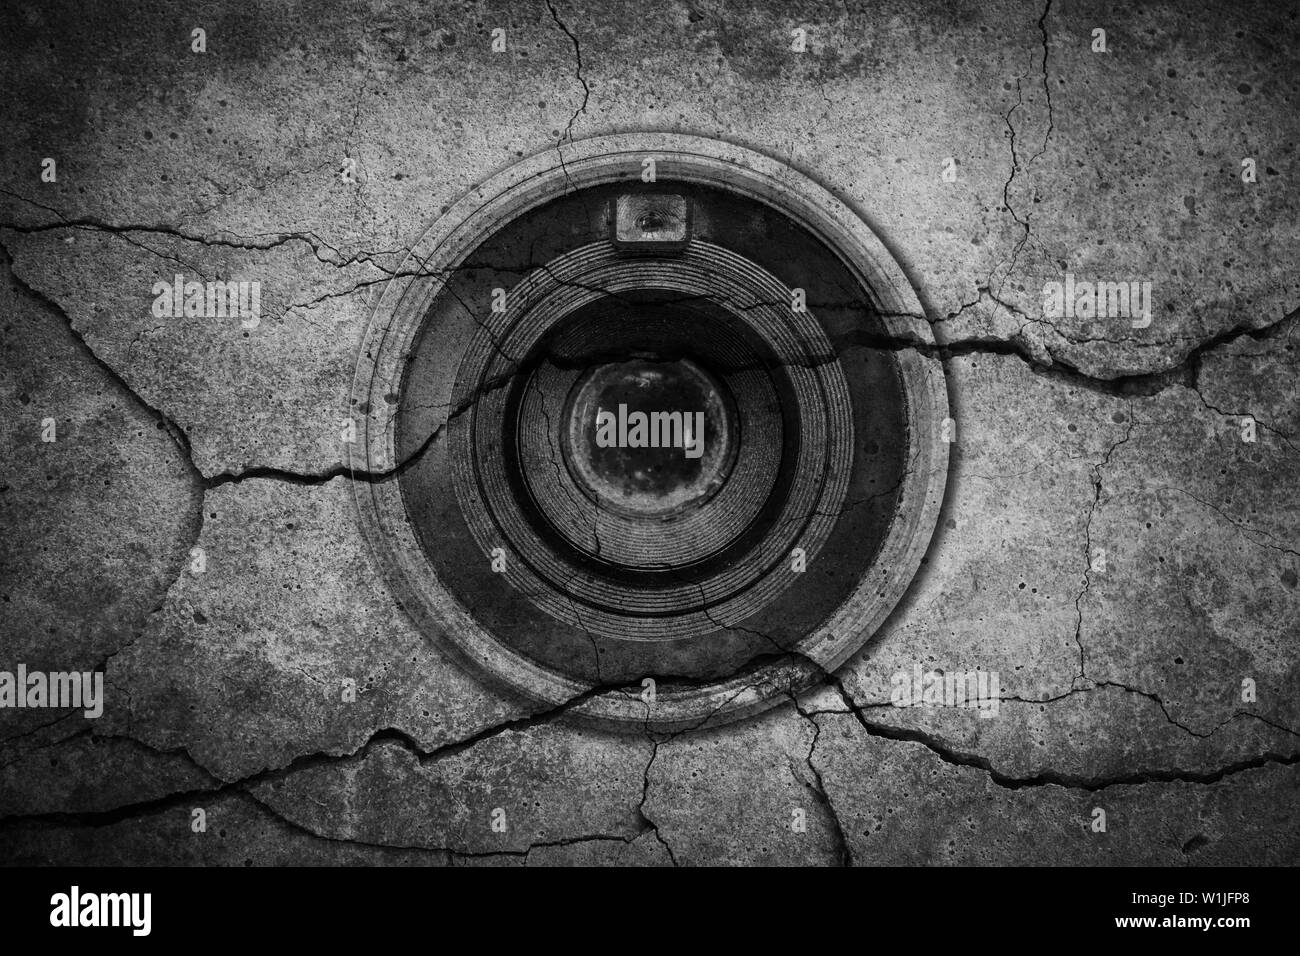 The camera lens is on cracked cement background Stock Photo